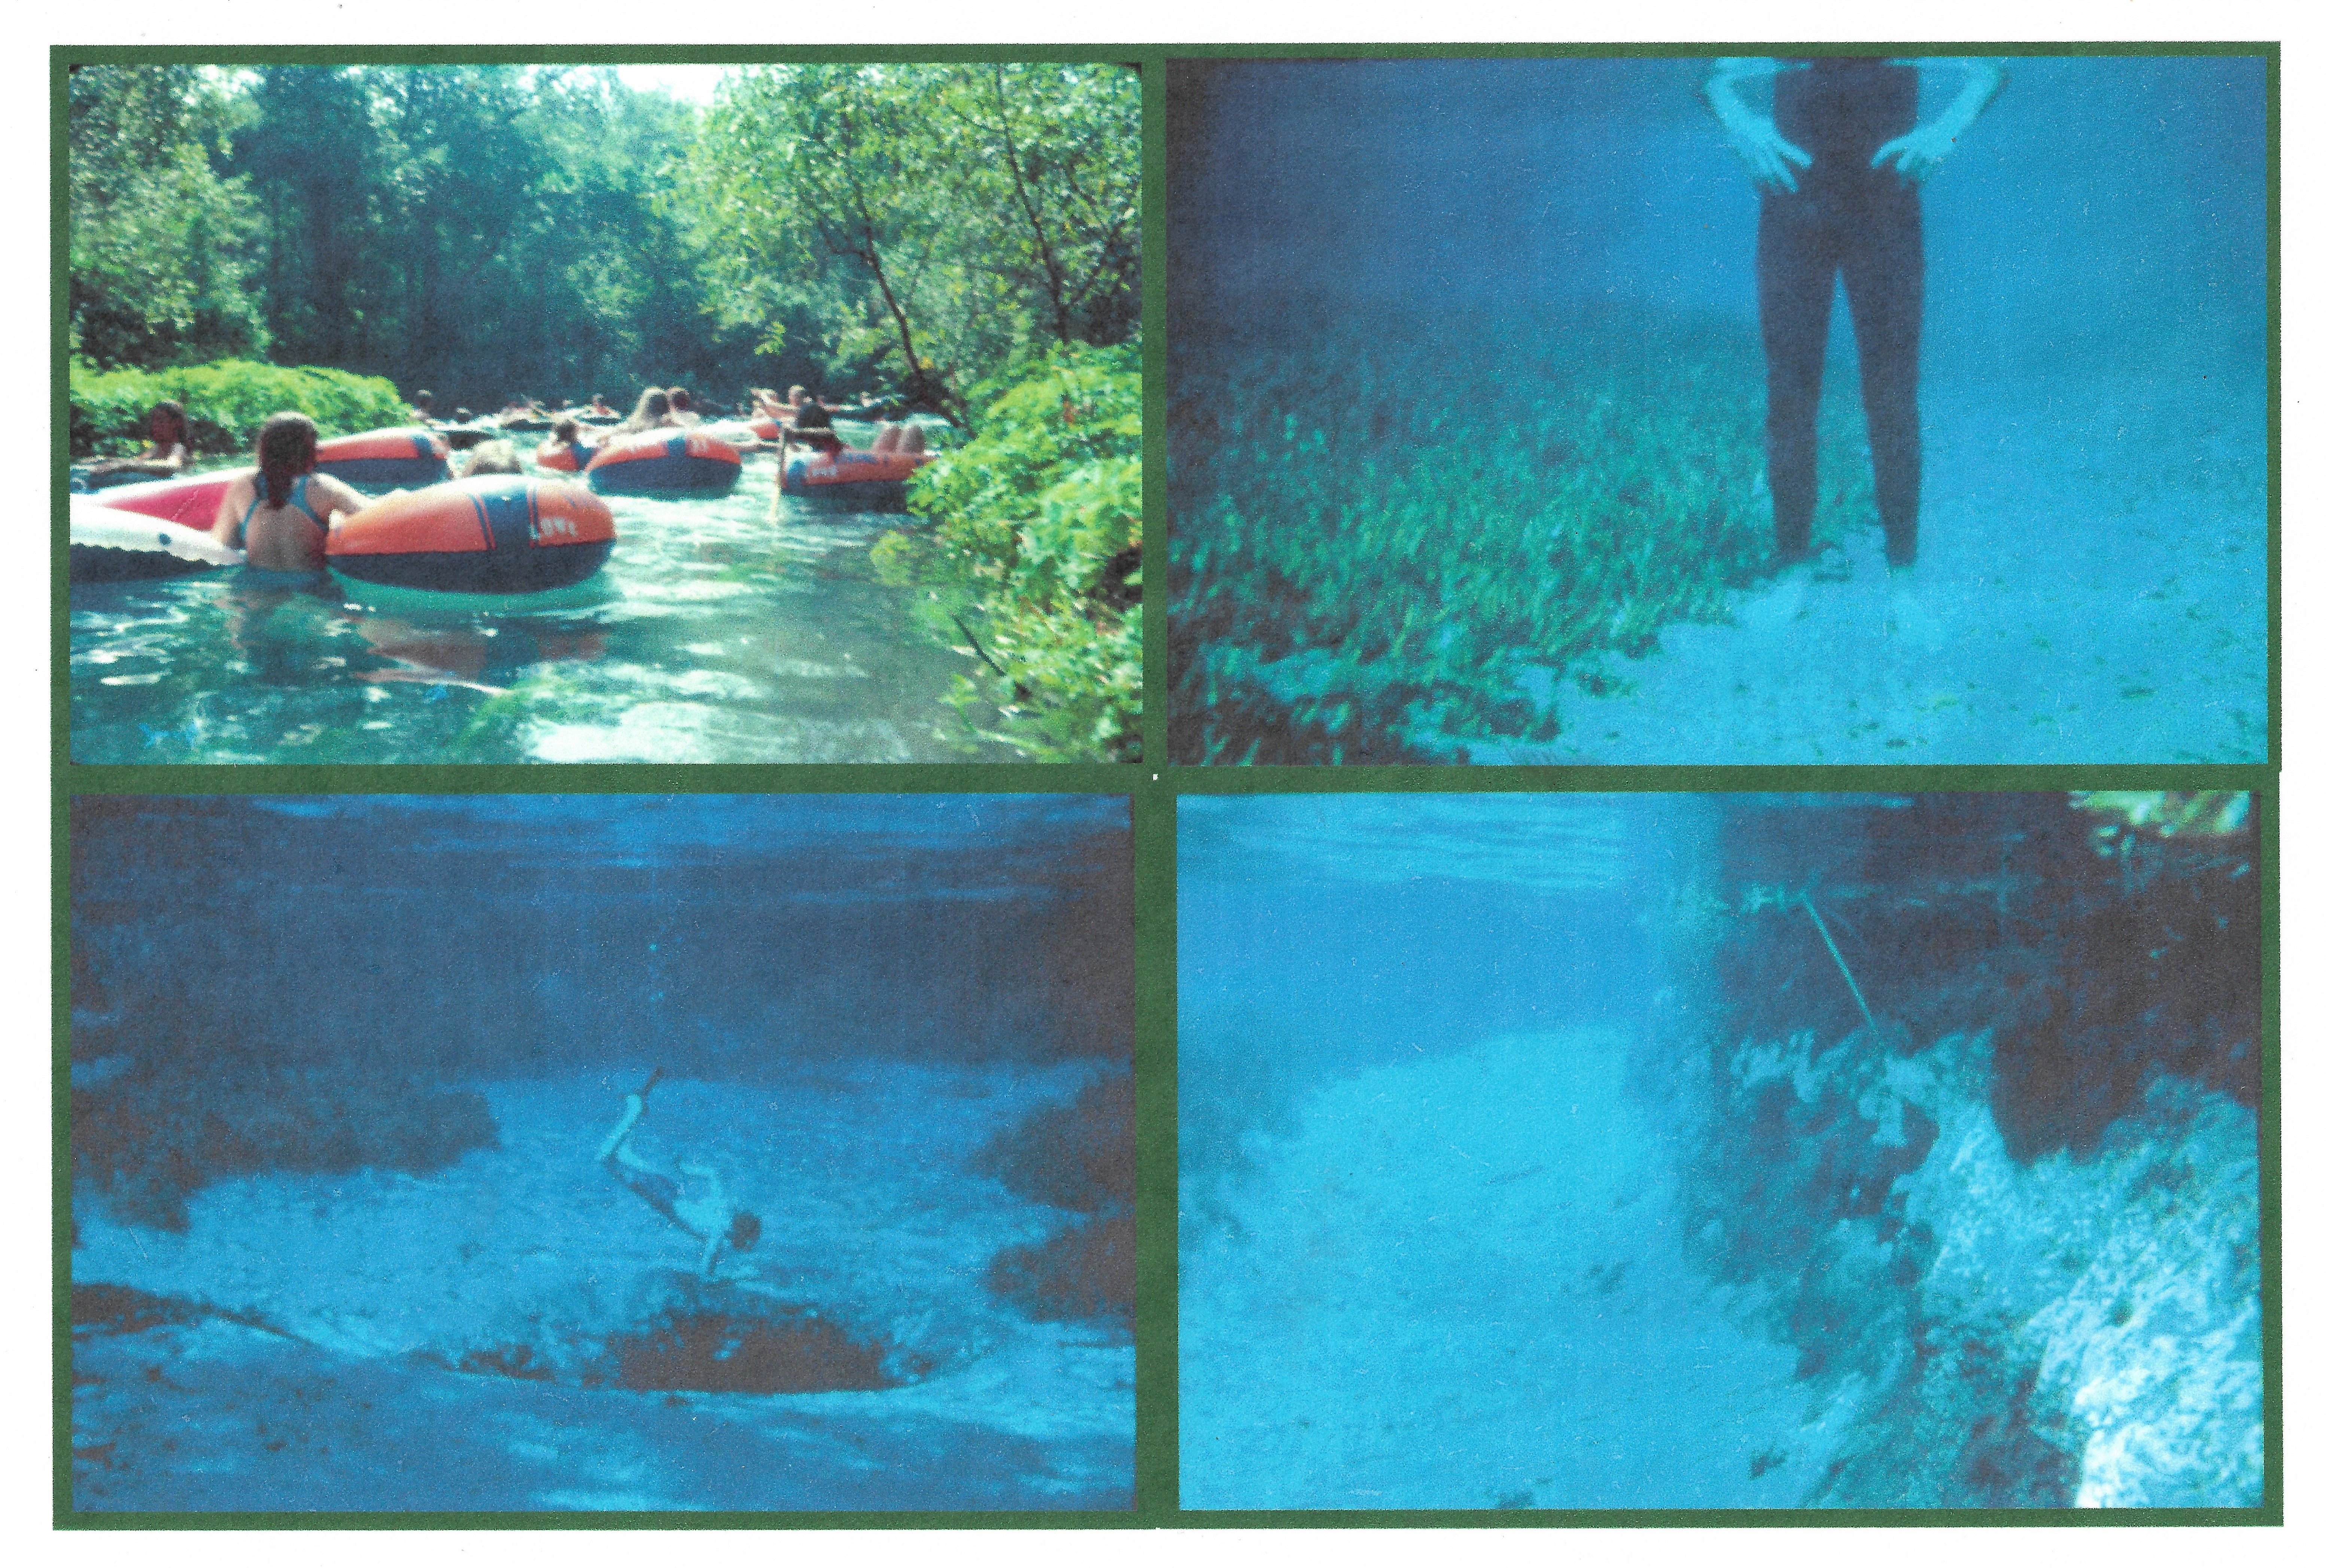 Four images: 1) a group of people use orange and white tubes to float down the river; 2) a person wearing a black wet suit standing on the river bottom with sand under the left foot and grasses under the right foot; 3) a snorkeling swimming toward a spring vent; 4) the sandy river bottom